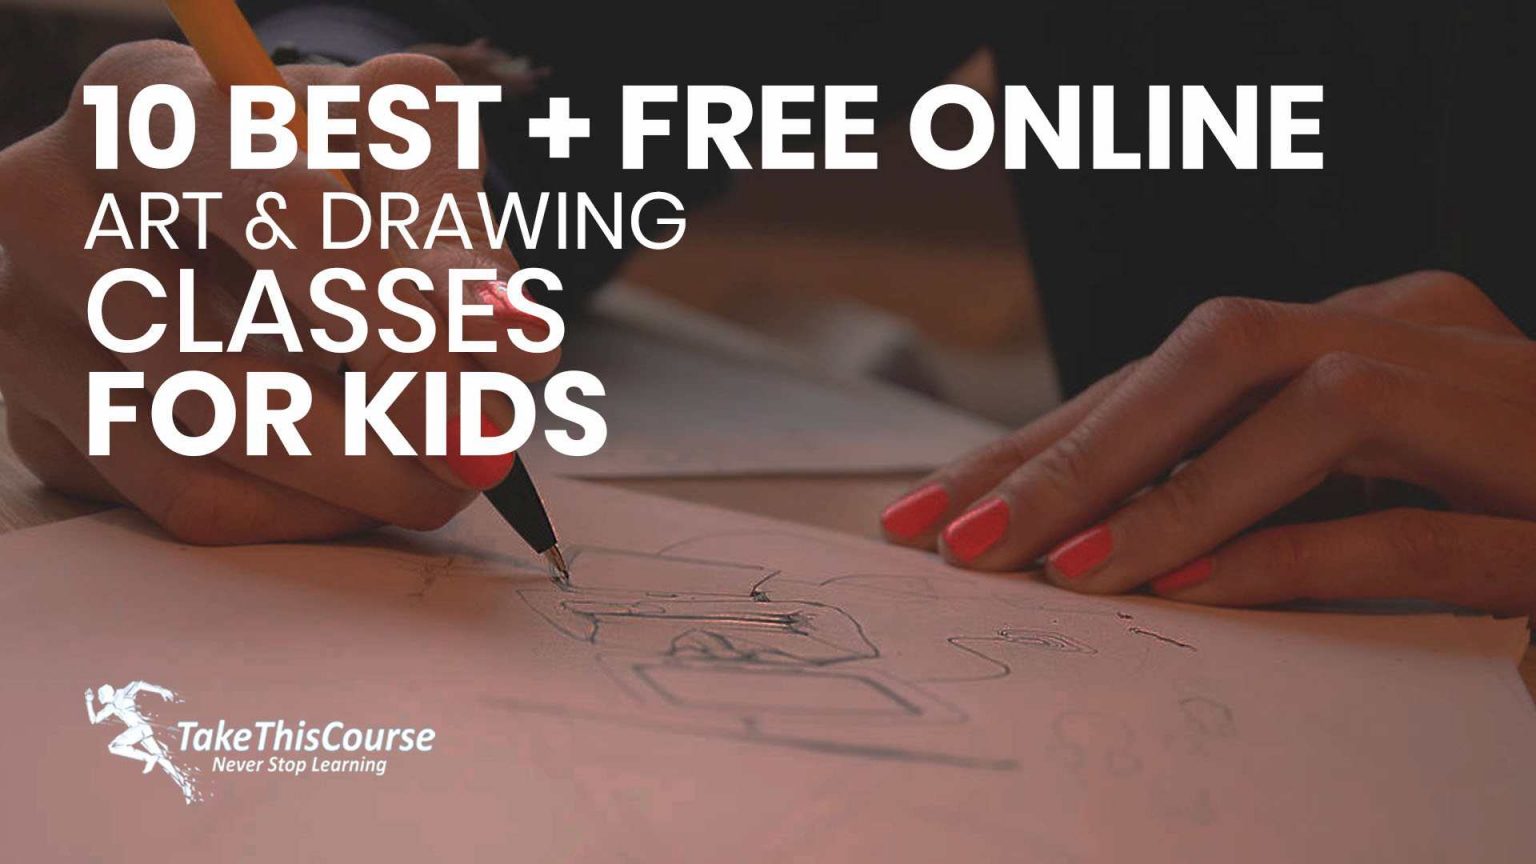 10 Best + Free Online Art & Drawing Classes for Kids Take This Course